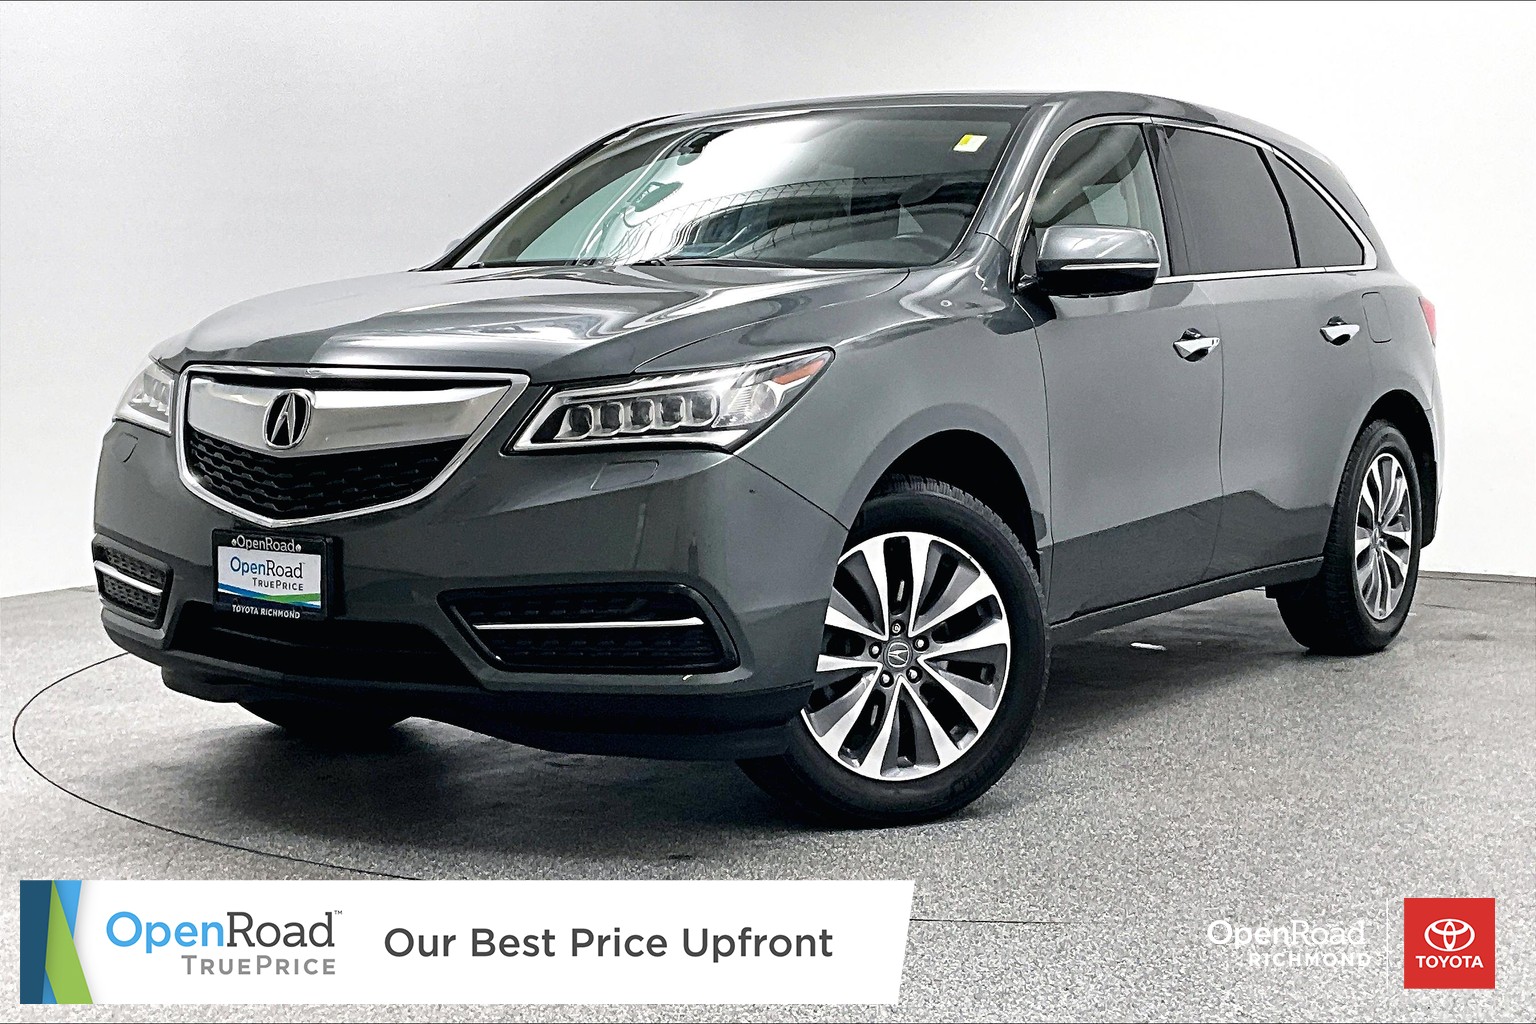 Acura MDX SH-AWD with Navigation 2014